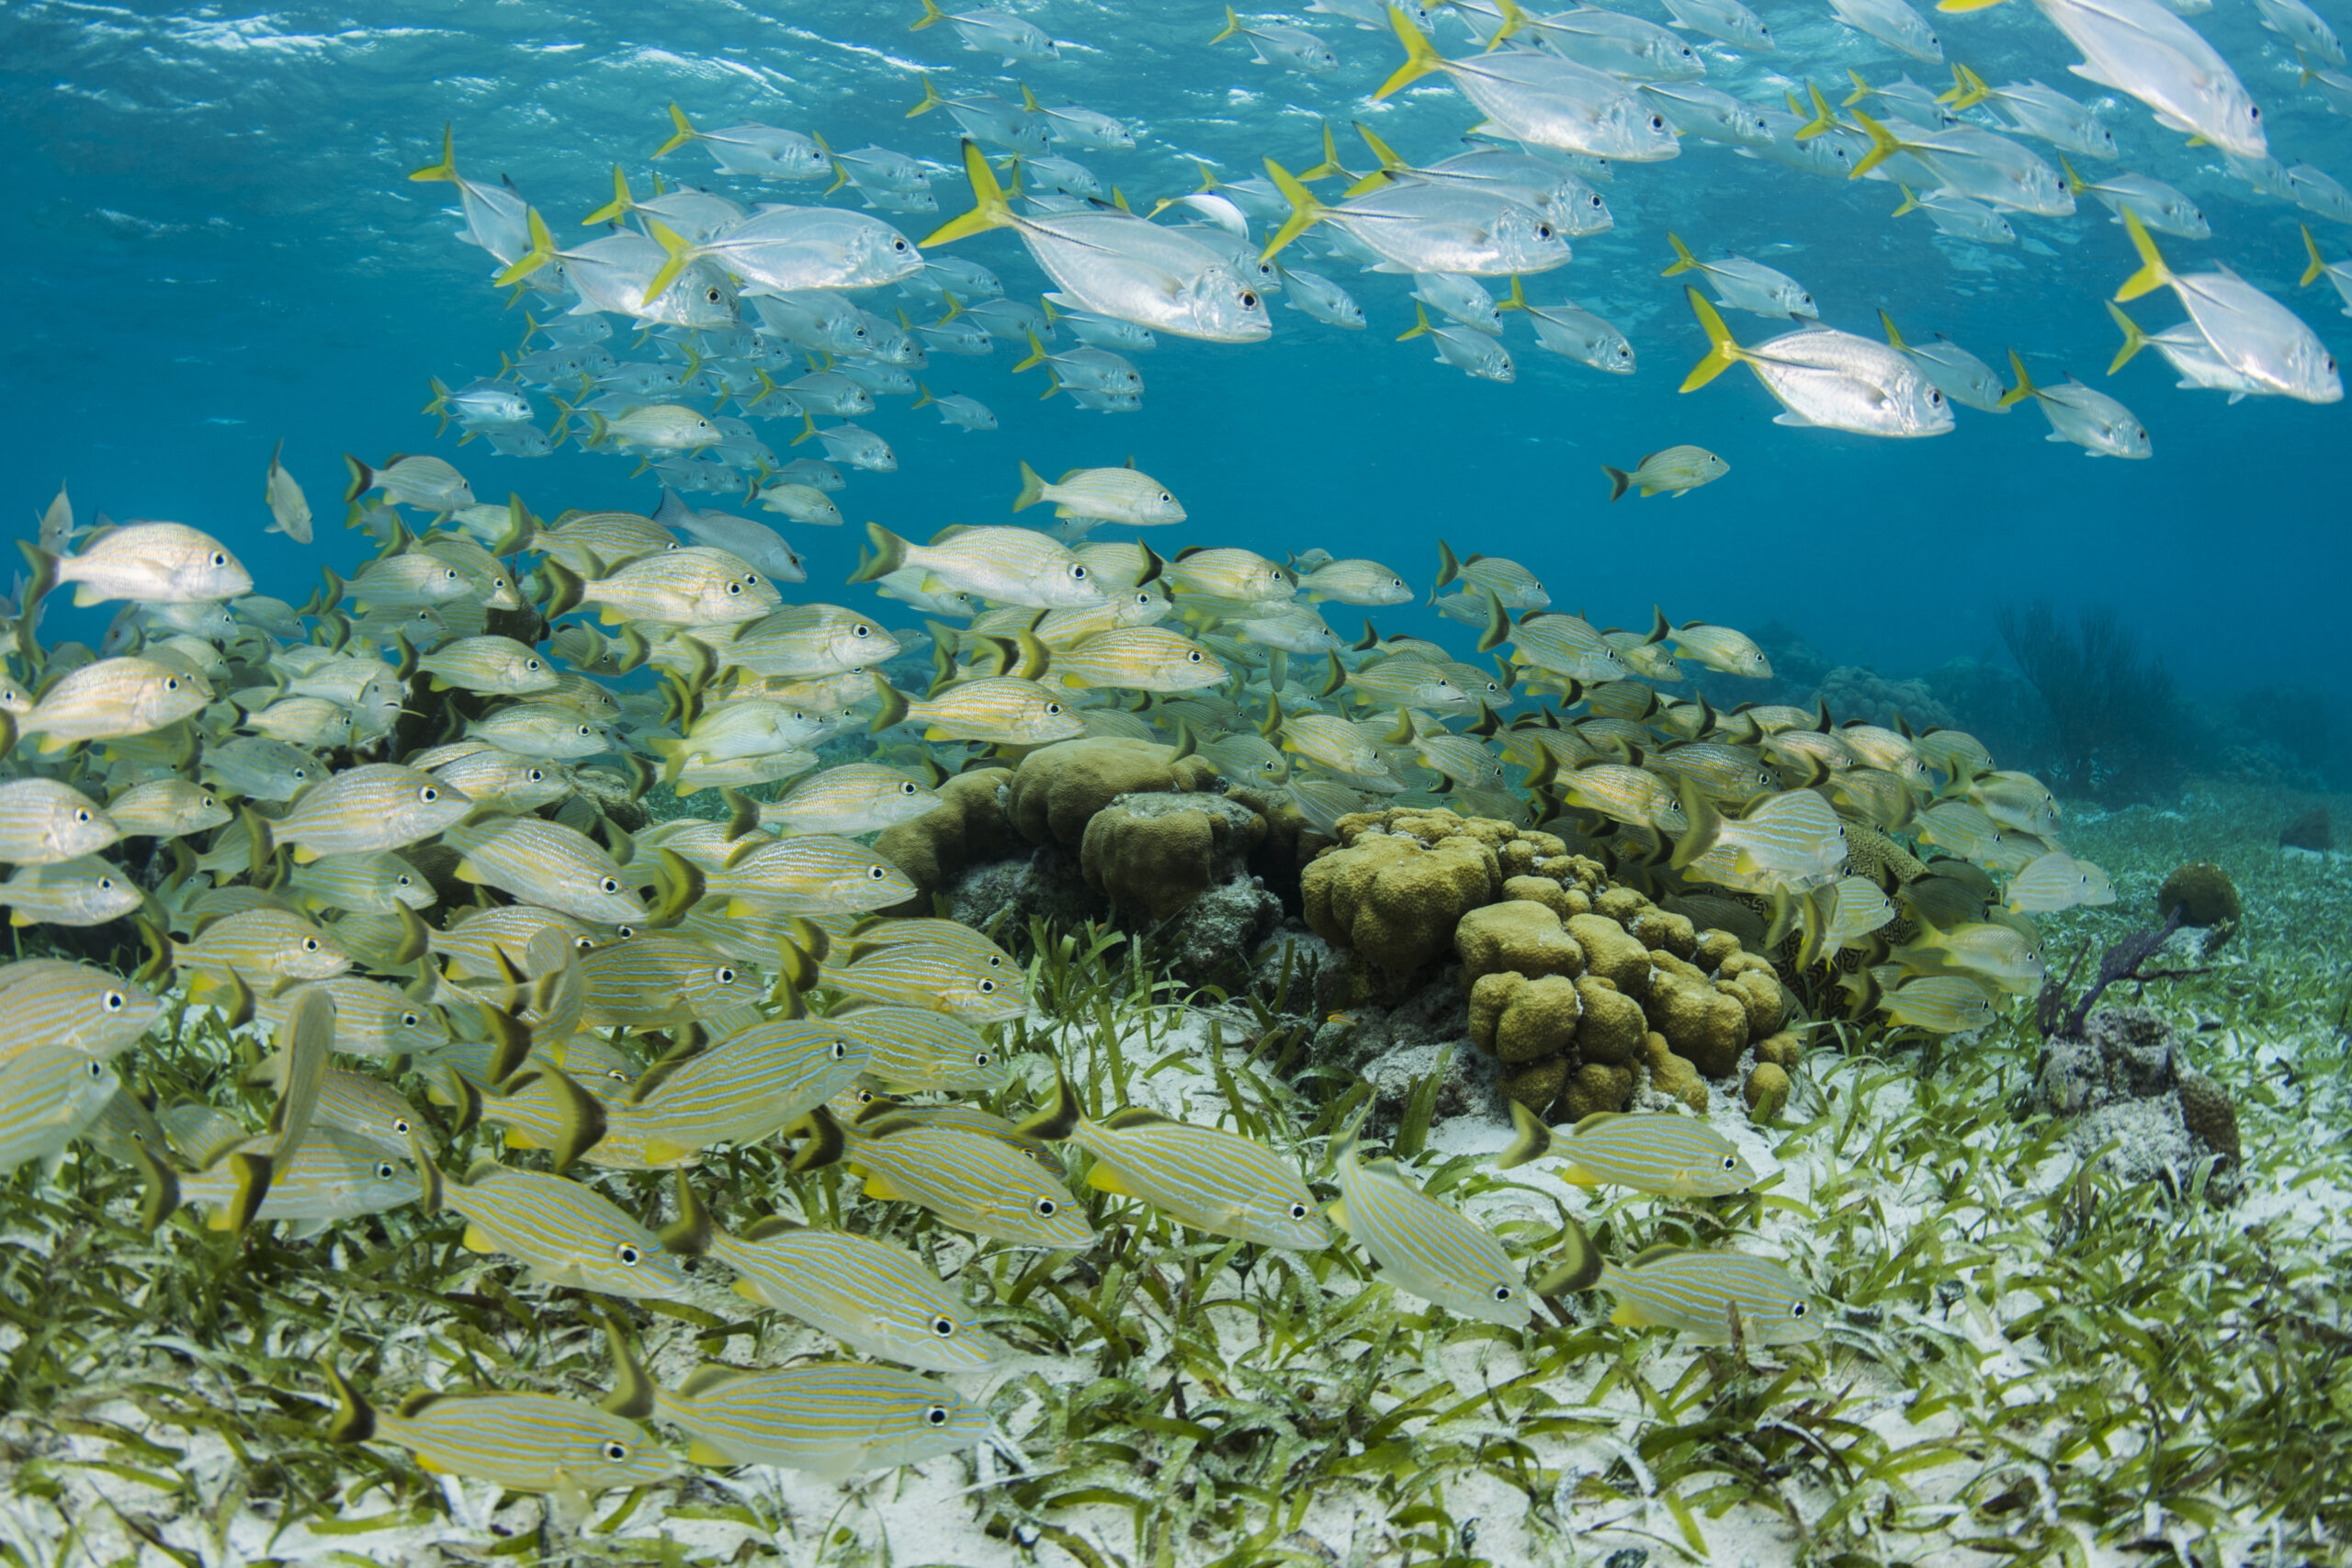 Fish are thriving near marine protected areas—and so are coastal communities